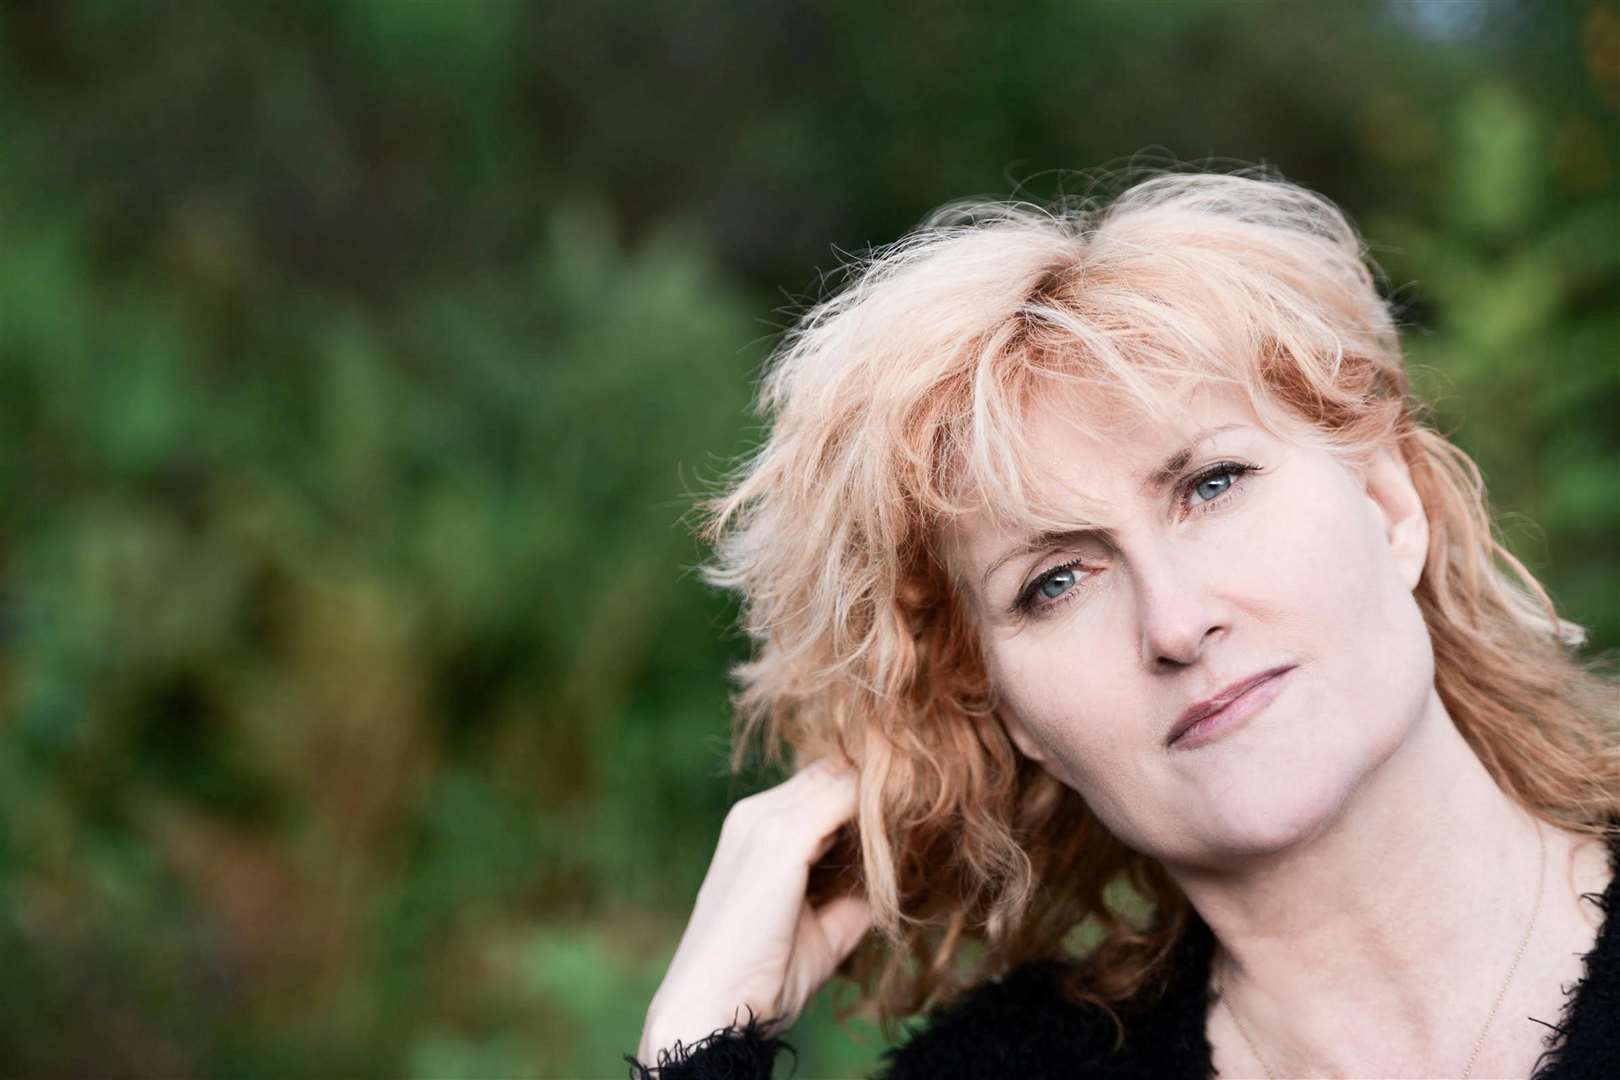 Eddi Reader celebrates 40 years in the business at Eden Court, Inverness on April 21.